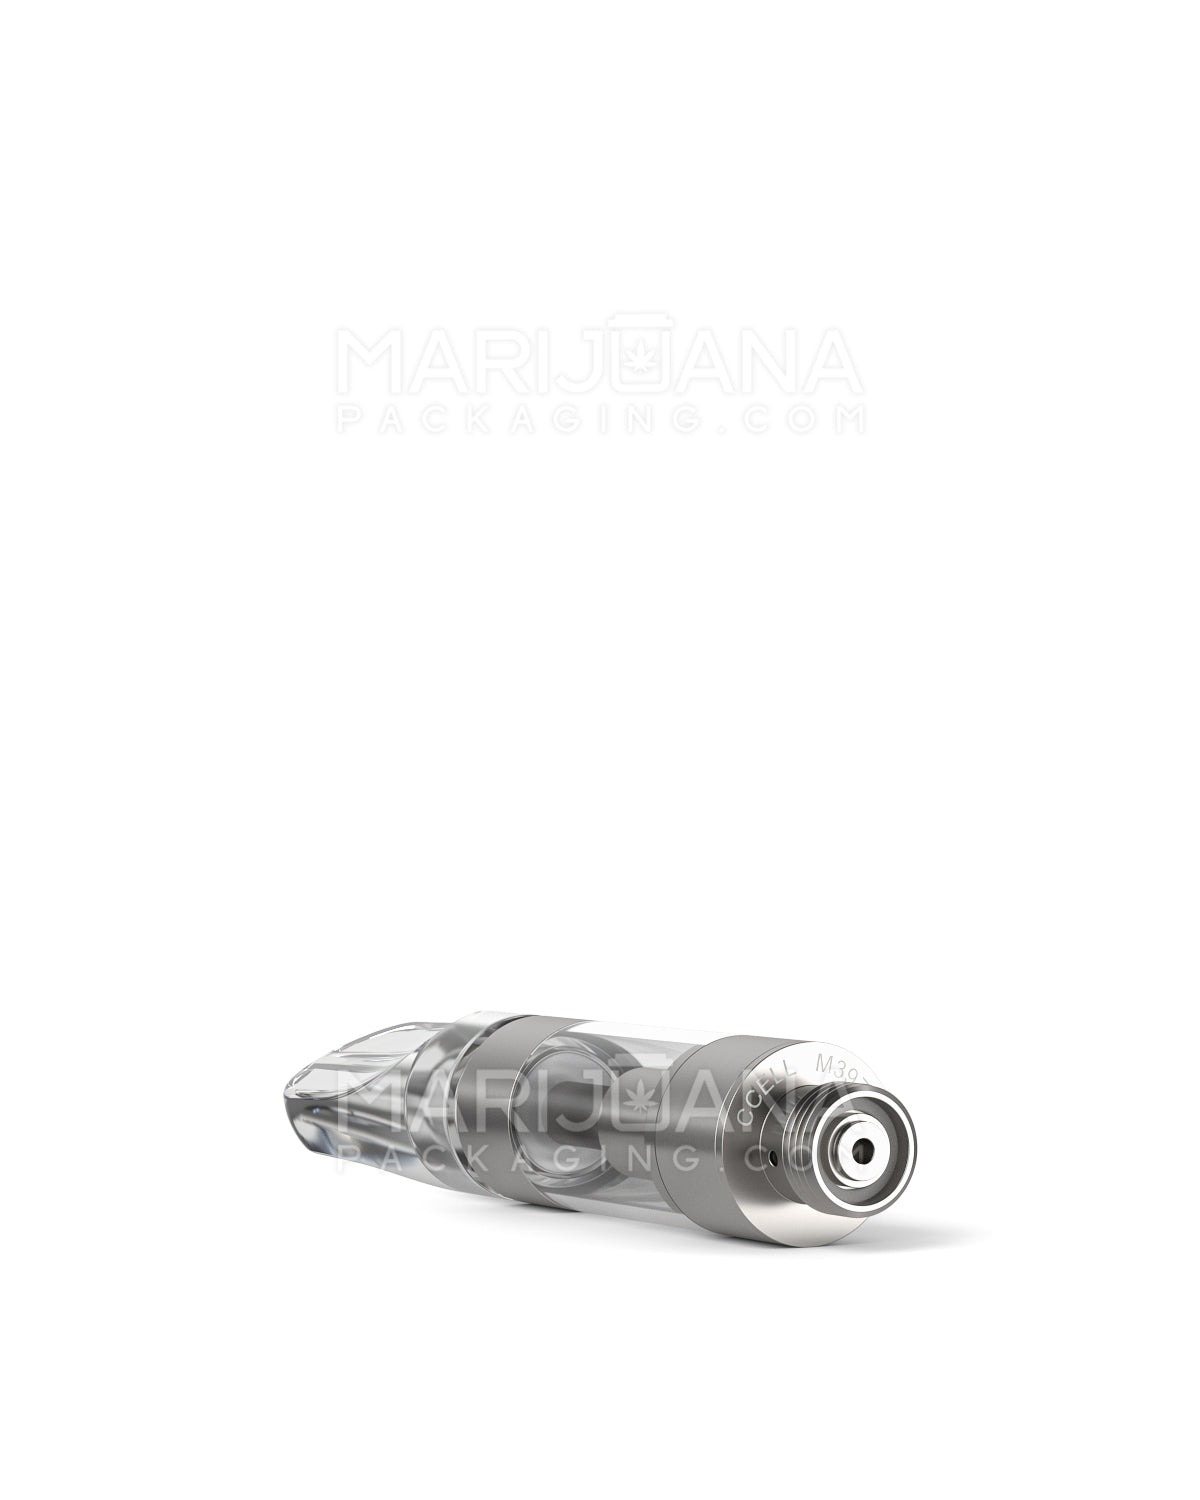 CCELL | Liquid6 Reactor Plastic Vape Cartridge with Clear Plastic Mouthpiece | 0.5mL - Press On - 100 Count - 7